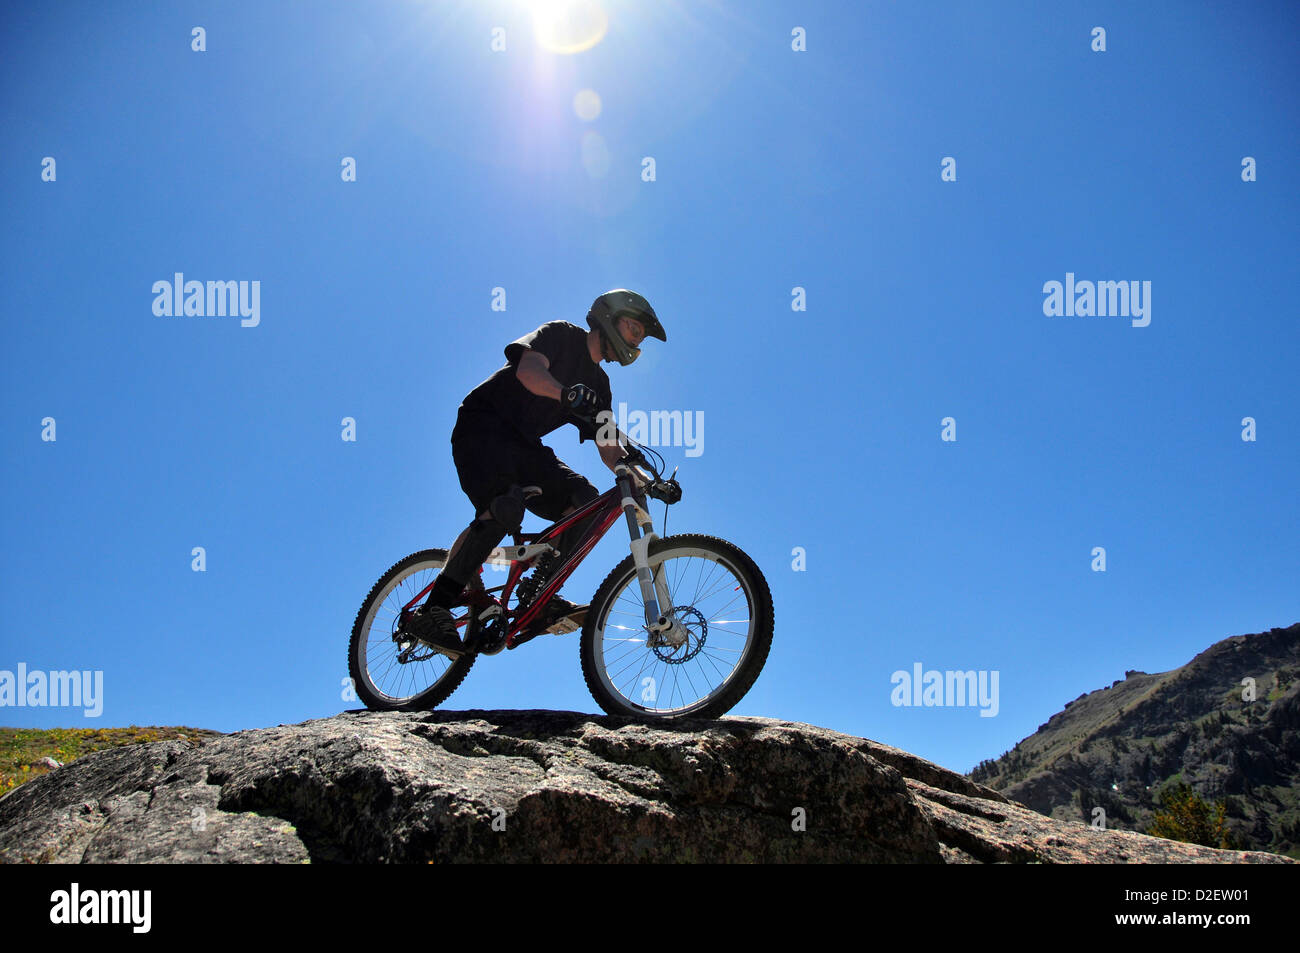 A mountain biker rides down a technical section of rock at Kirkwood Mountain Resort in the summer, CA. Stock Photo